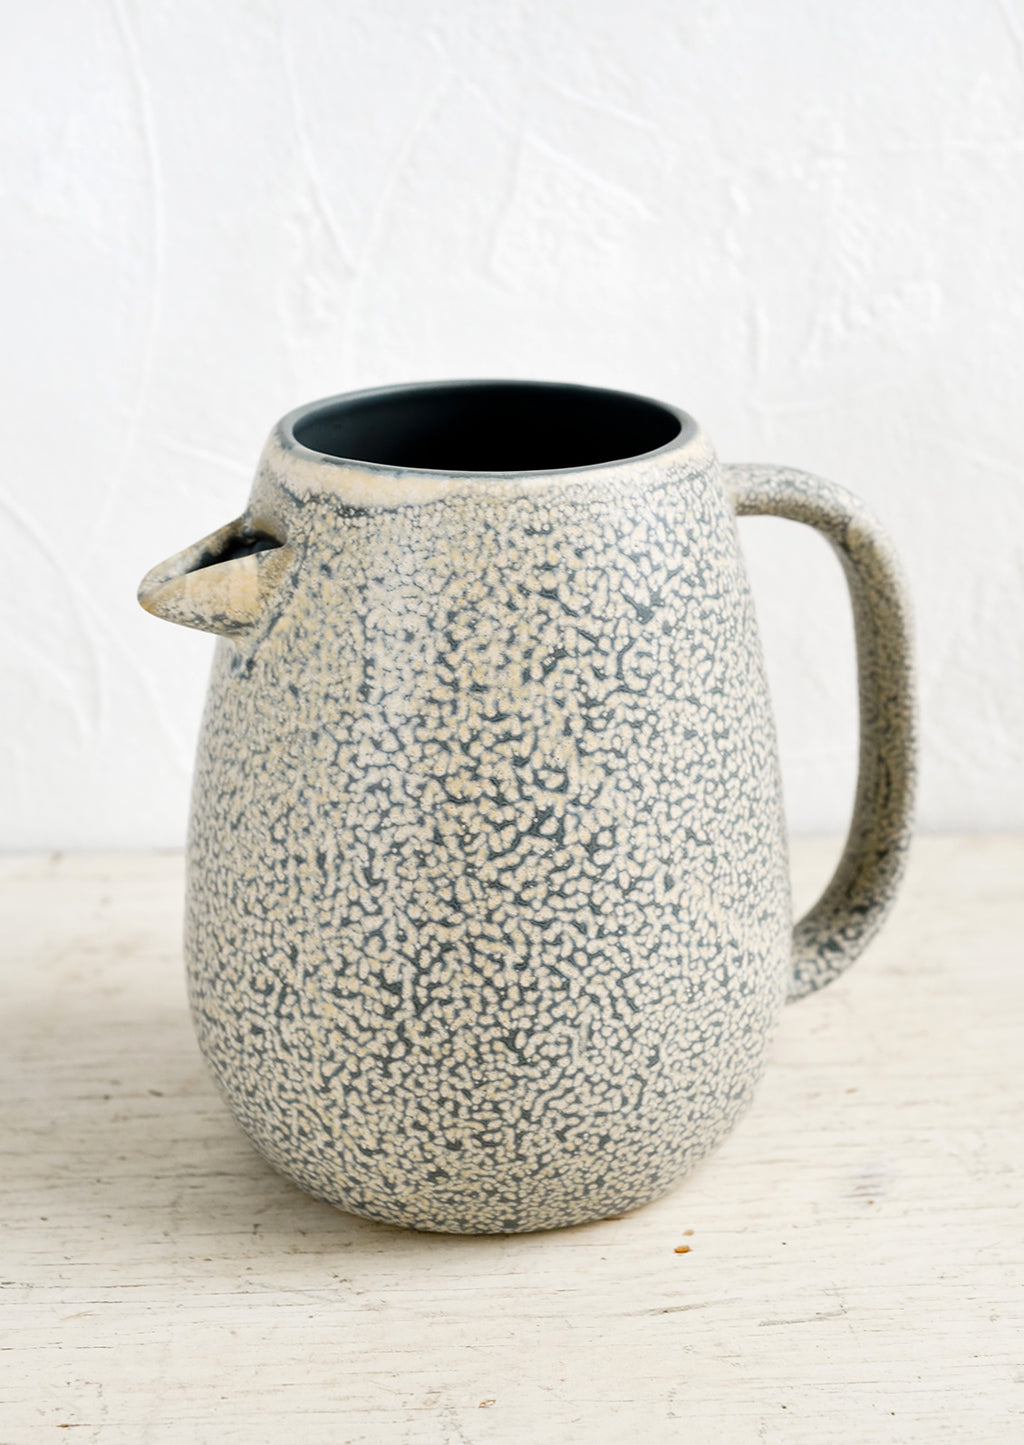 1: A ceramic pitcher with built-in spout in speckled grey and natural glaze.